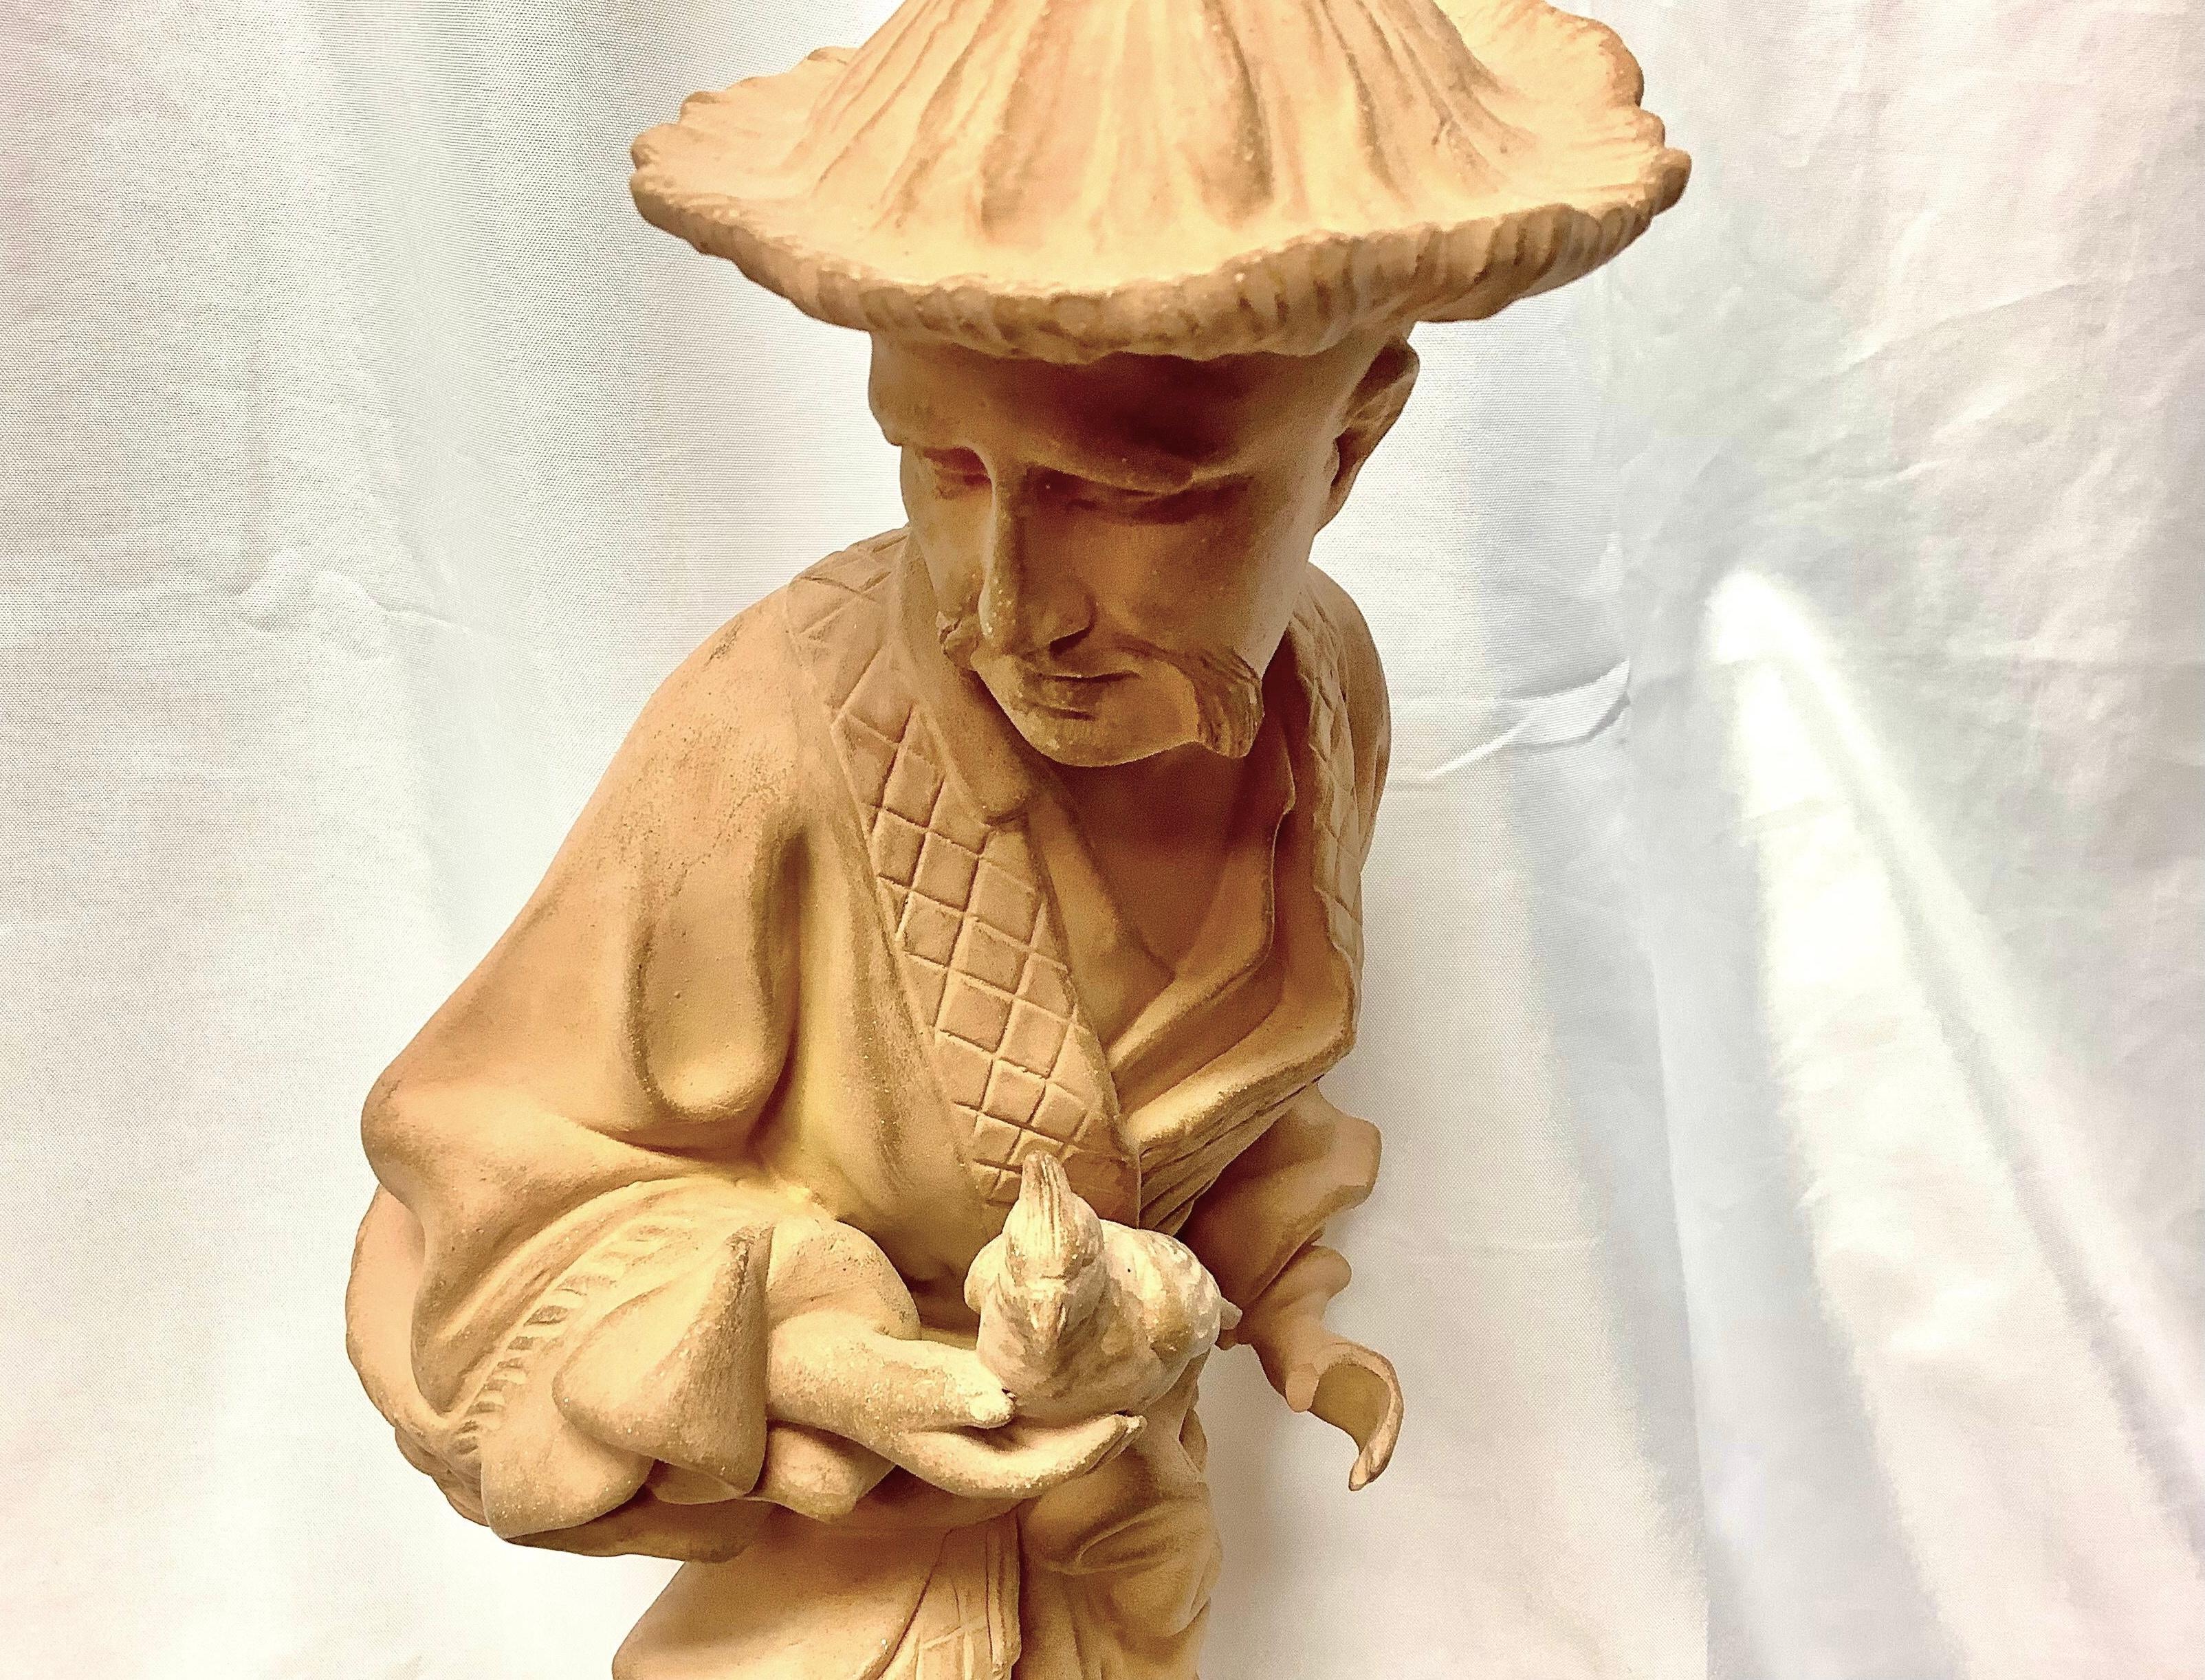 Unique pair of terracotta Chinoiserie Chinese figures. Man is holding a bird, woman is holding a lantern. Excellent condition.